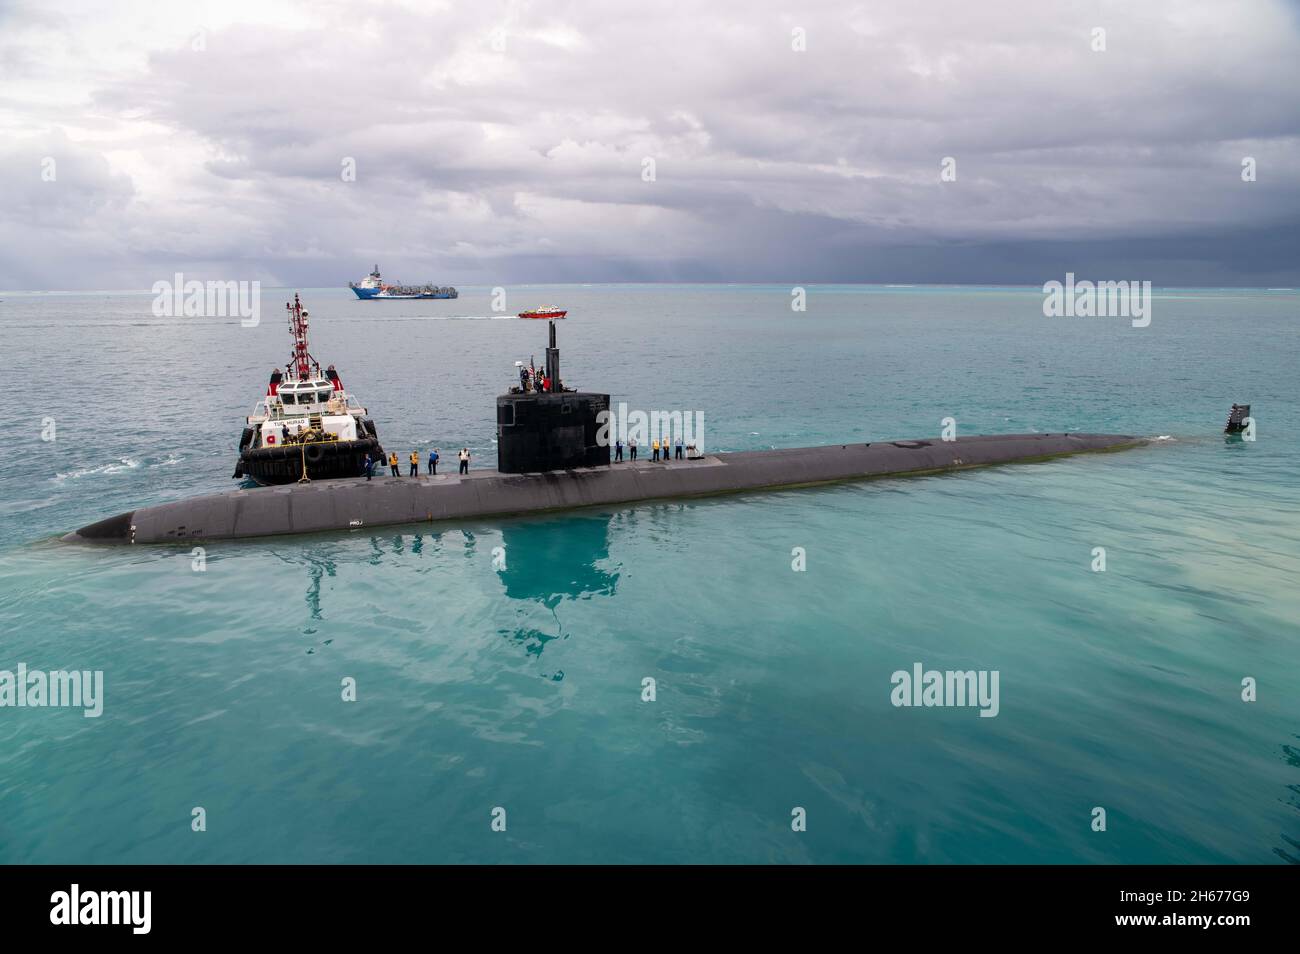 Saipan, Northern Mariana Islands. 23 October, 2021. The U.S. Navy Los Angeles-class fast attack submarine USS Hampton departs after resupplying from the submarine tender USS Frank Cable October 23, 2021 in Saipan, Northern Mariana Islands. Credit: MC1 Charlotte Oliver/U.S. Navy/Alamy Live News Stock Photo